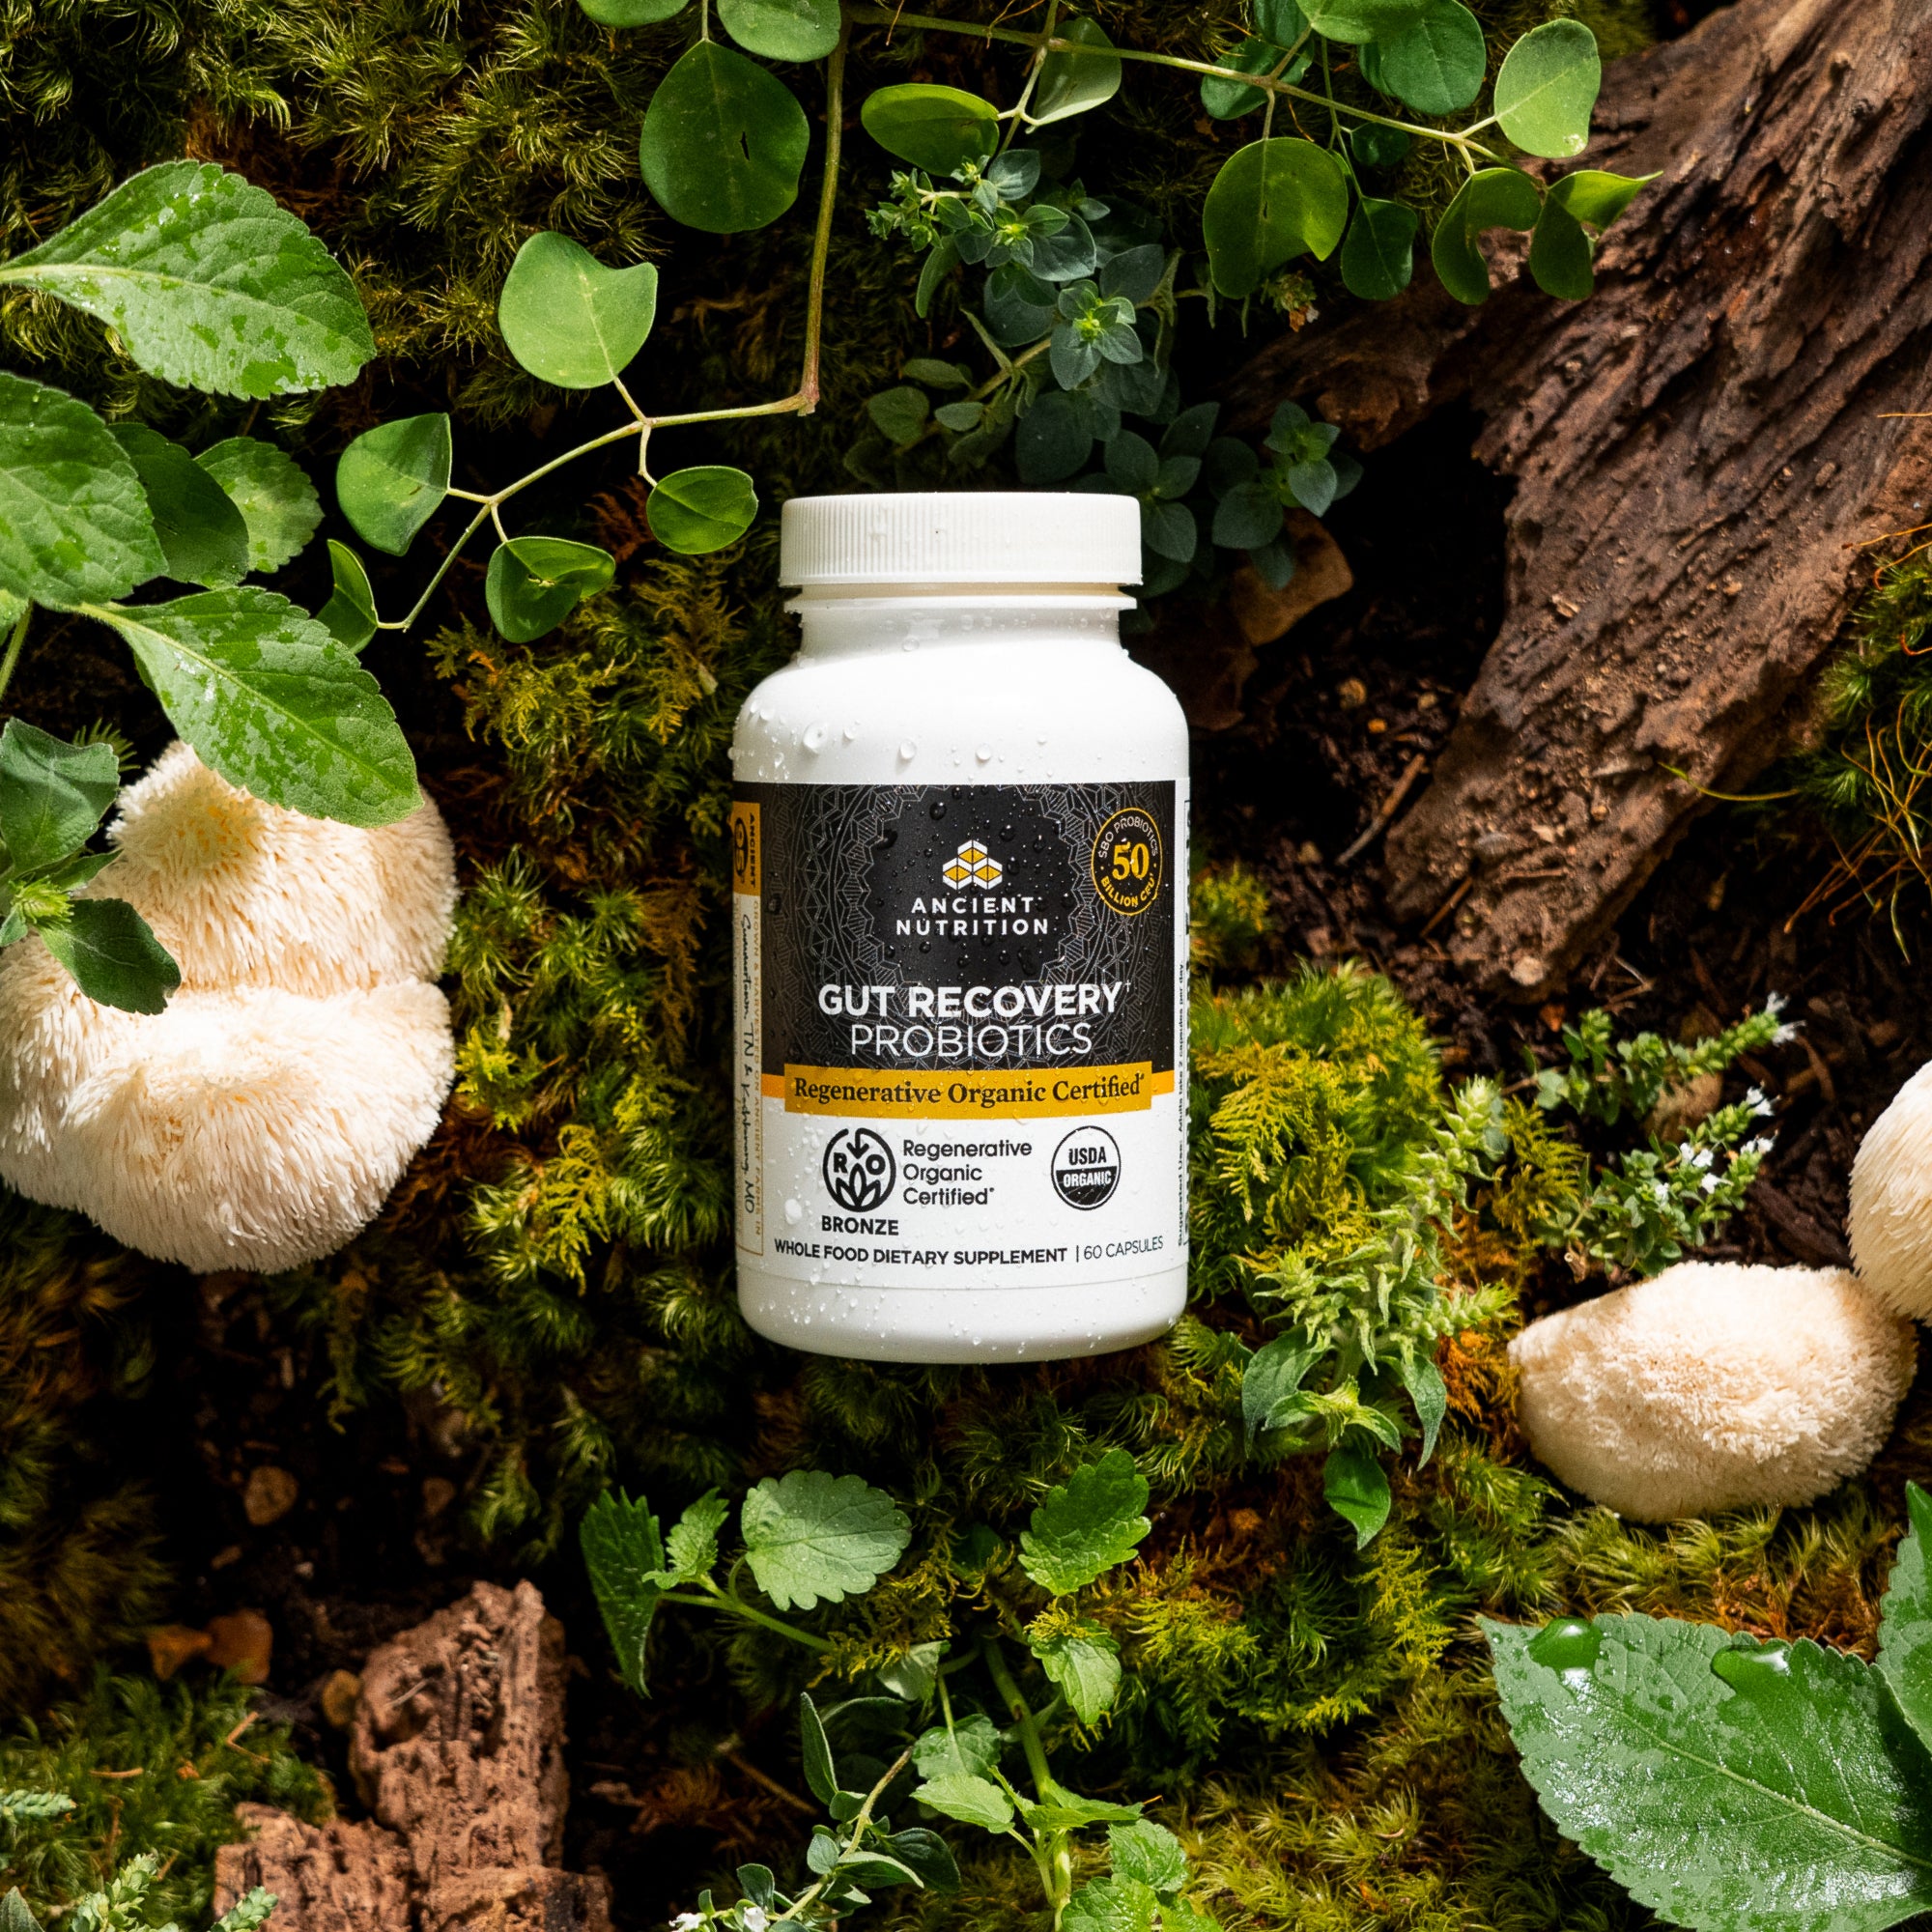 Regenerative Organic Certified™ Gut Recovery Probiotics on top of a mossy rock